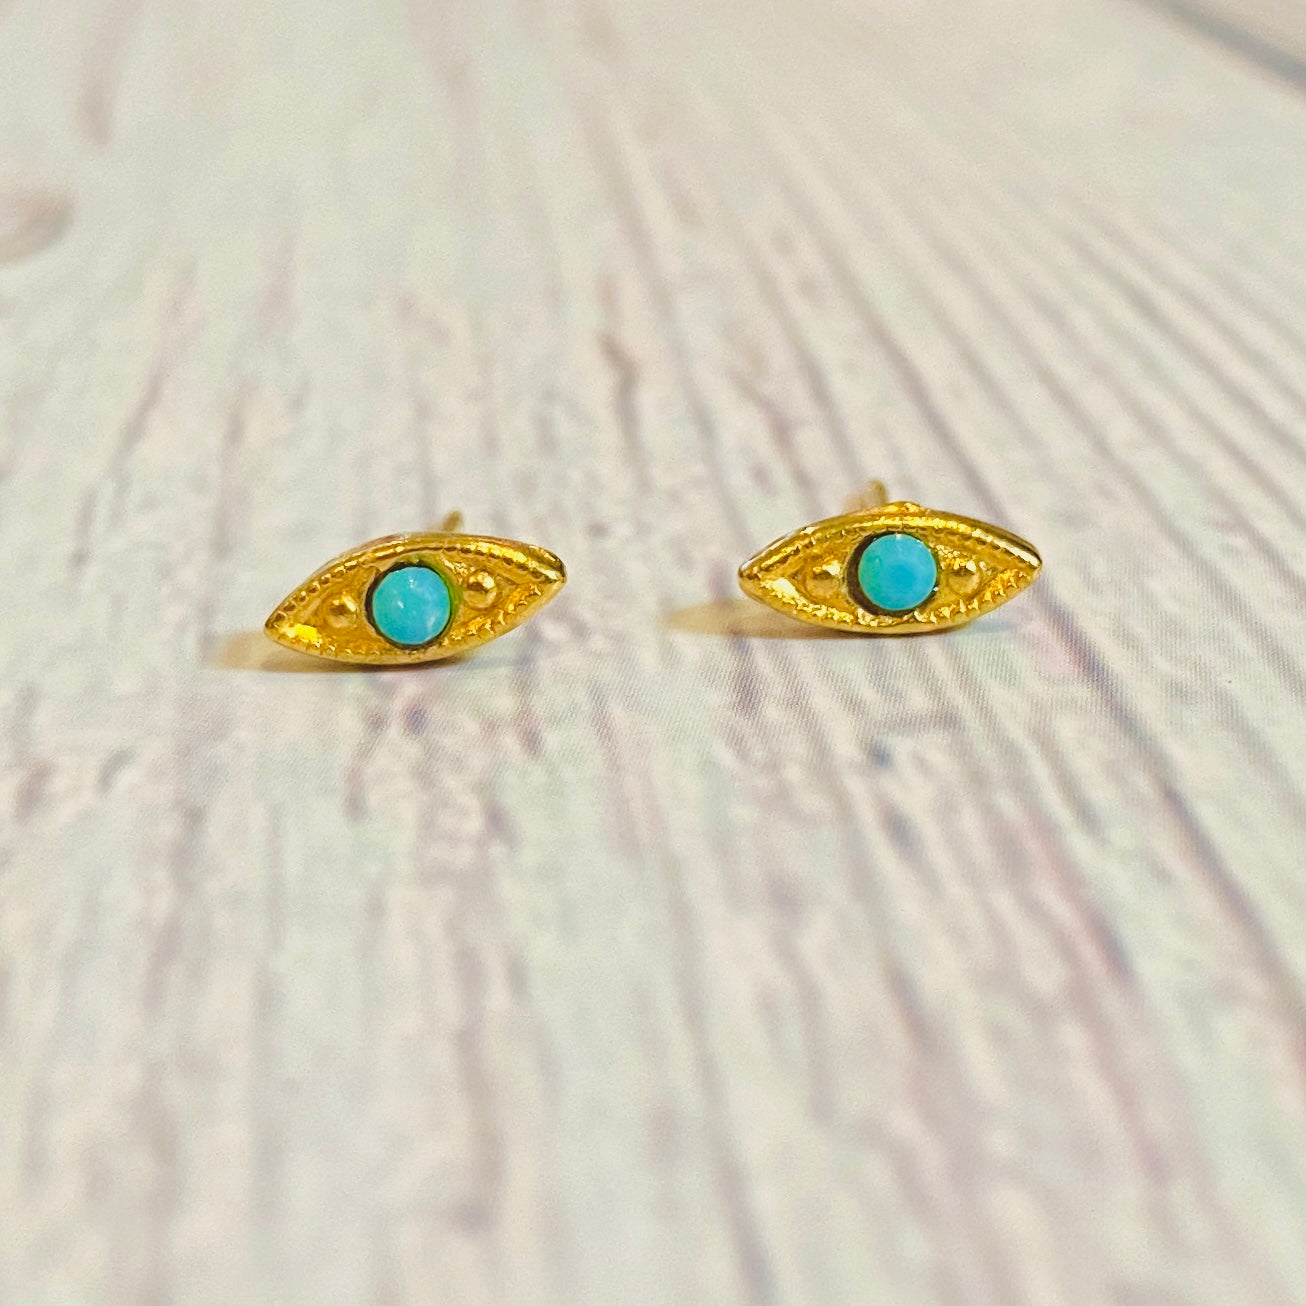 Gold plated brass turquoise eye stud earrings. 